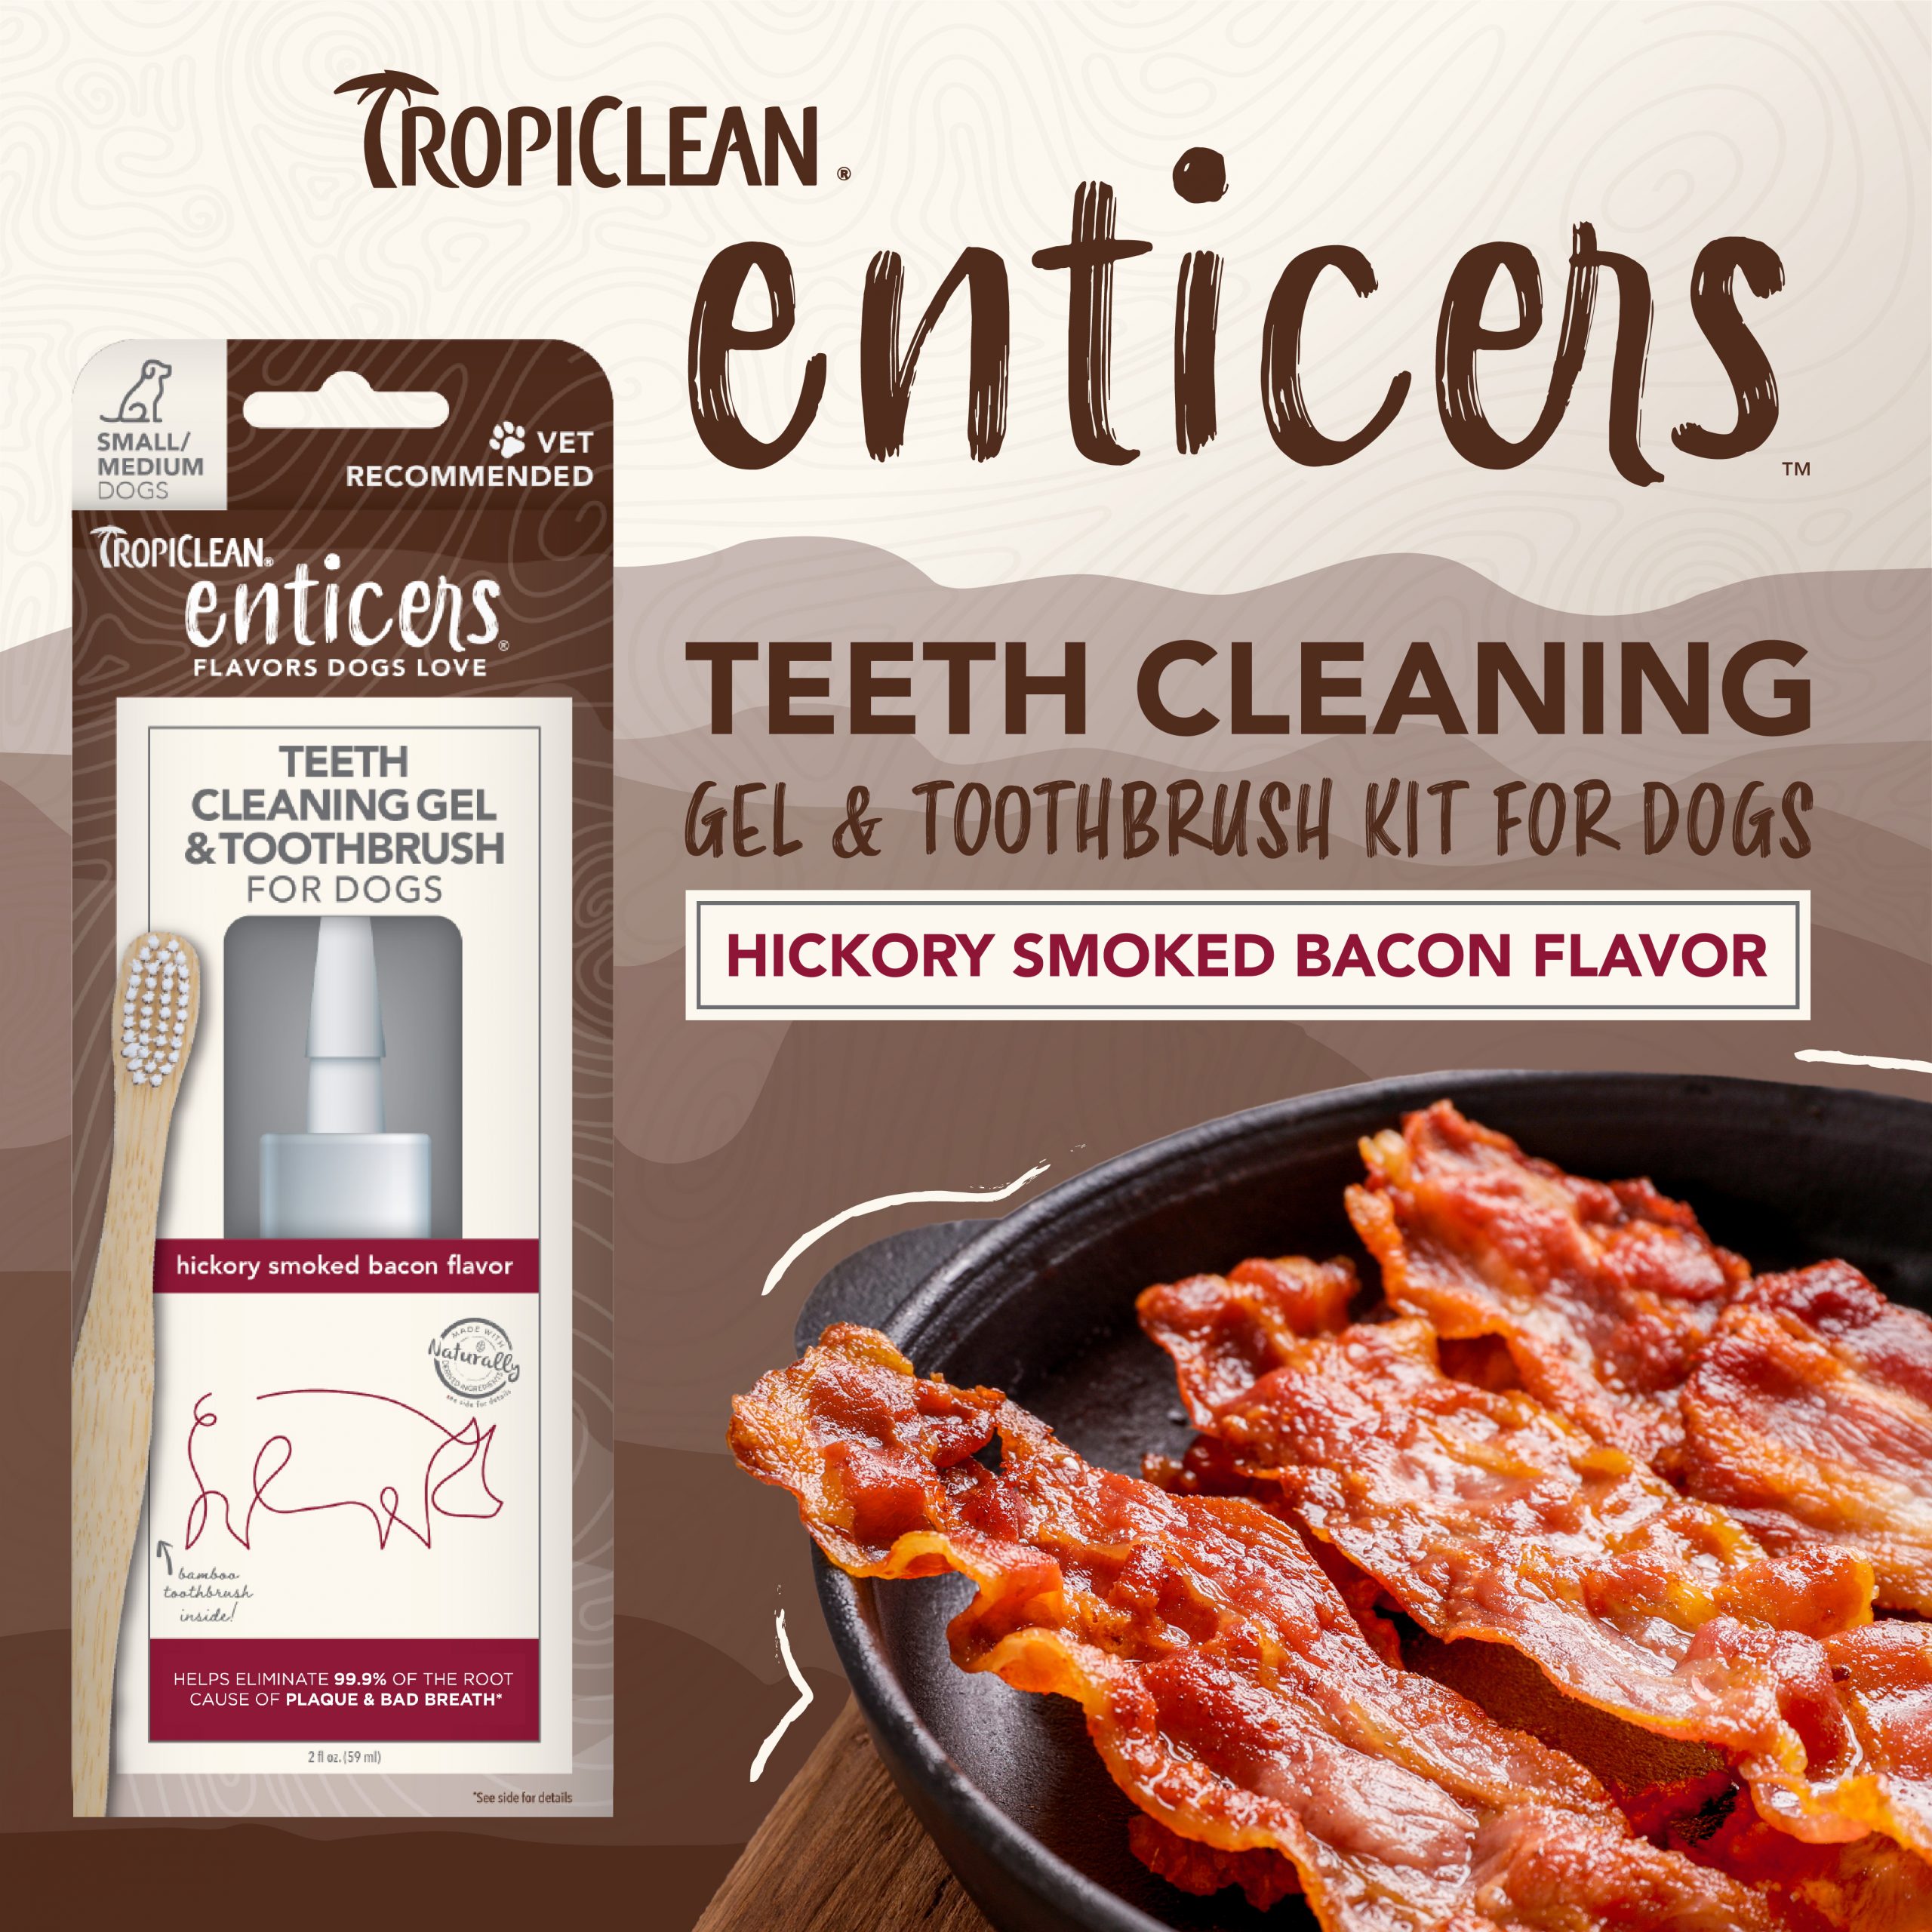 Teeth Cleaning Gel & Toothbrush for Small/Medium Dogs – Hickory Smoked Bacon Flavor